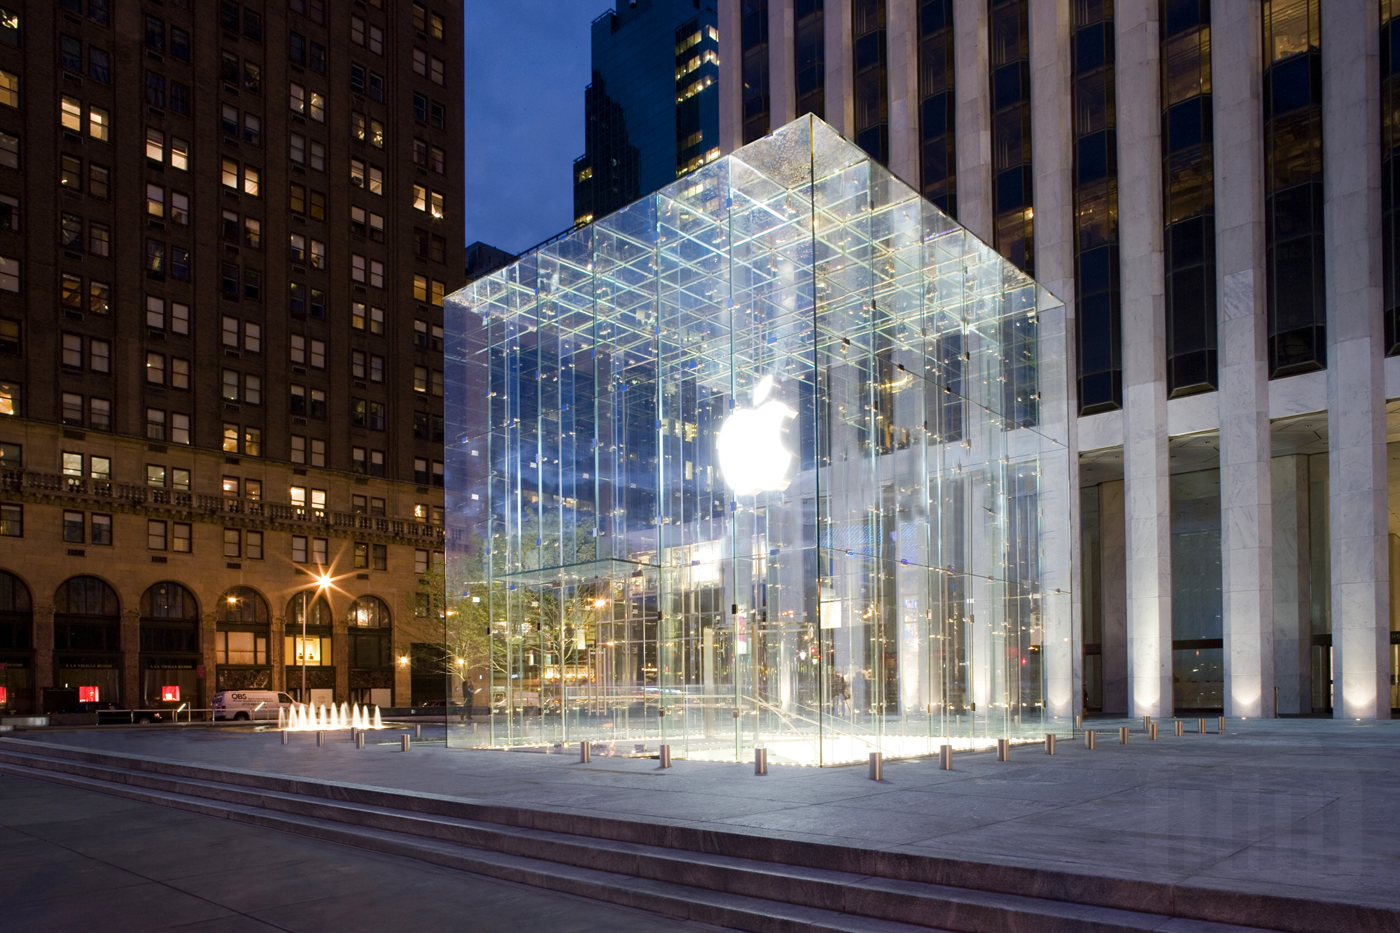 Reflecting: Apple is a conspiracy to change the world [atualizado]